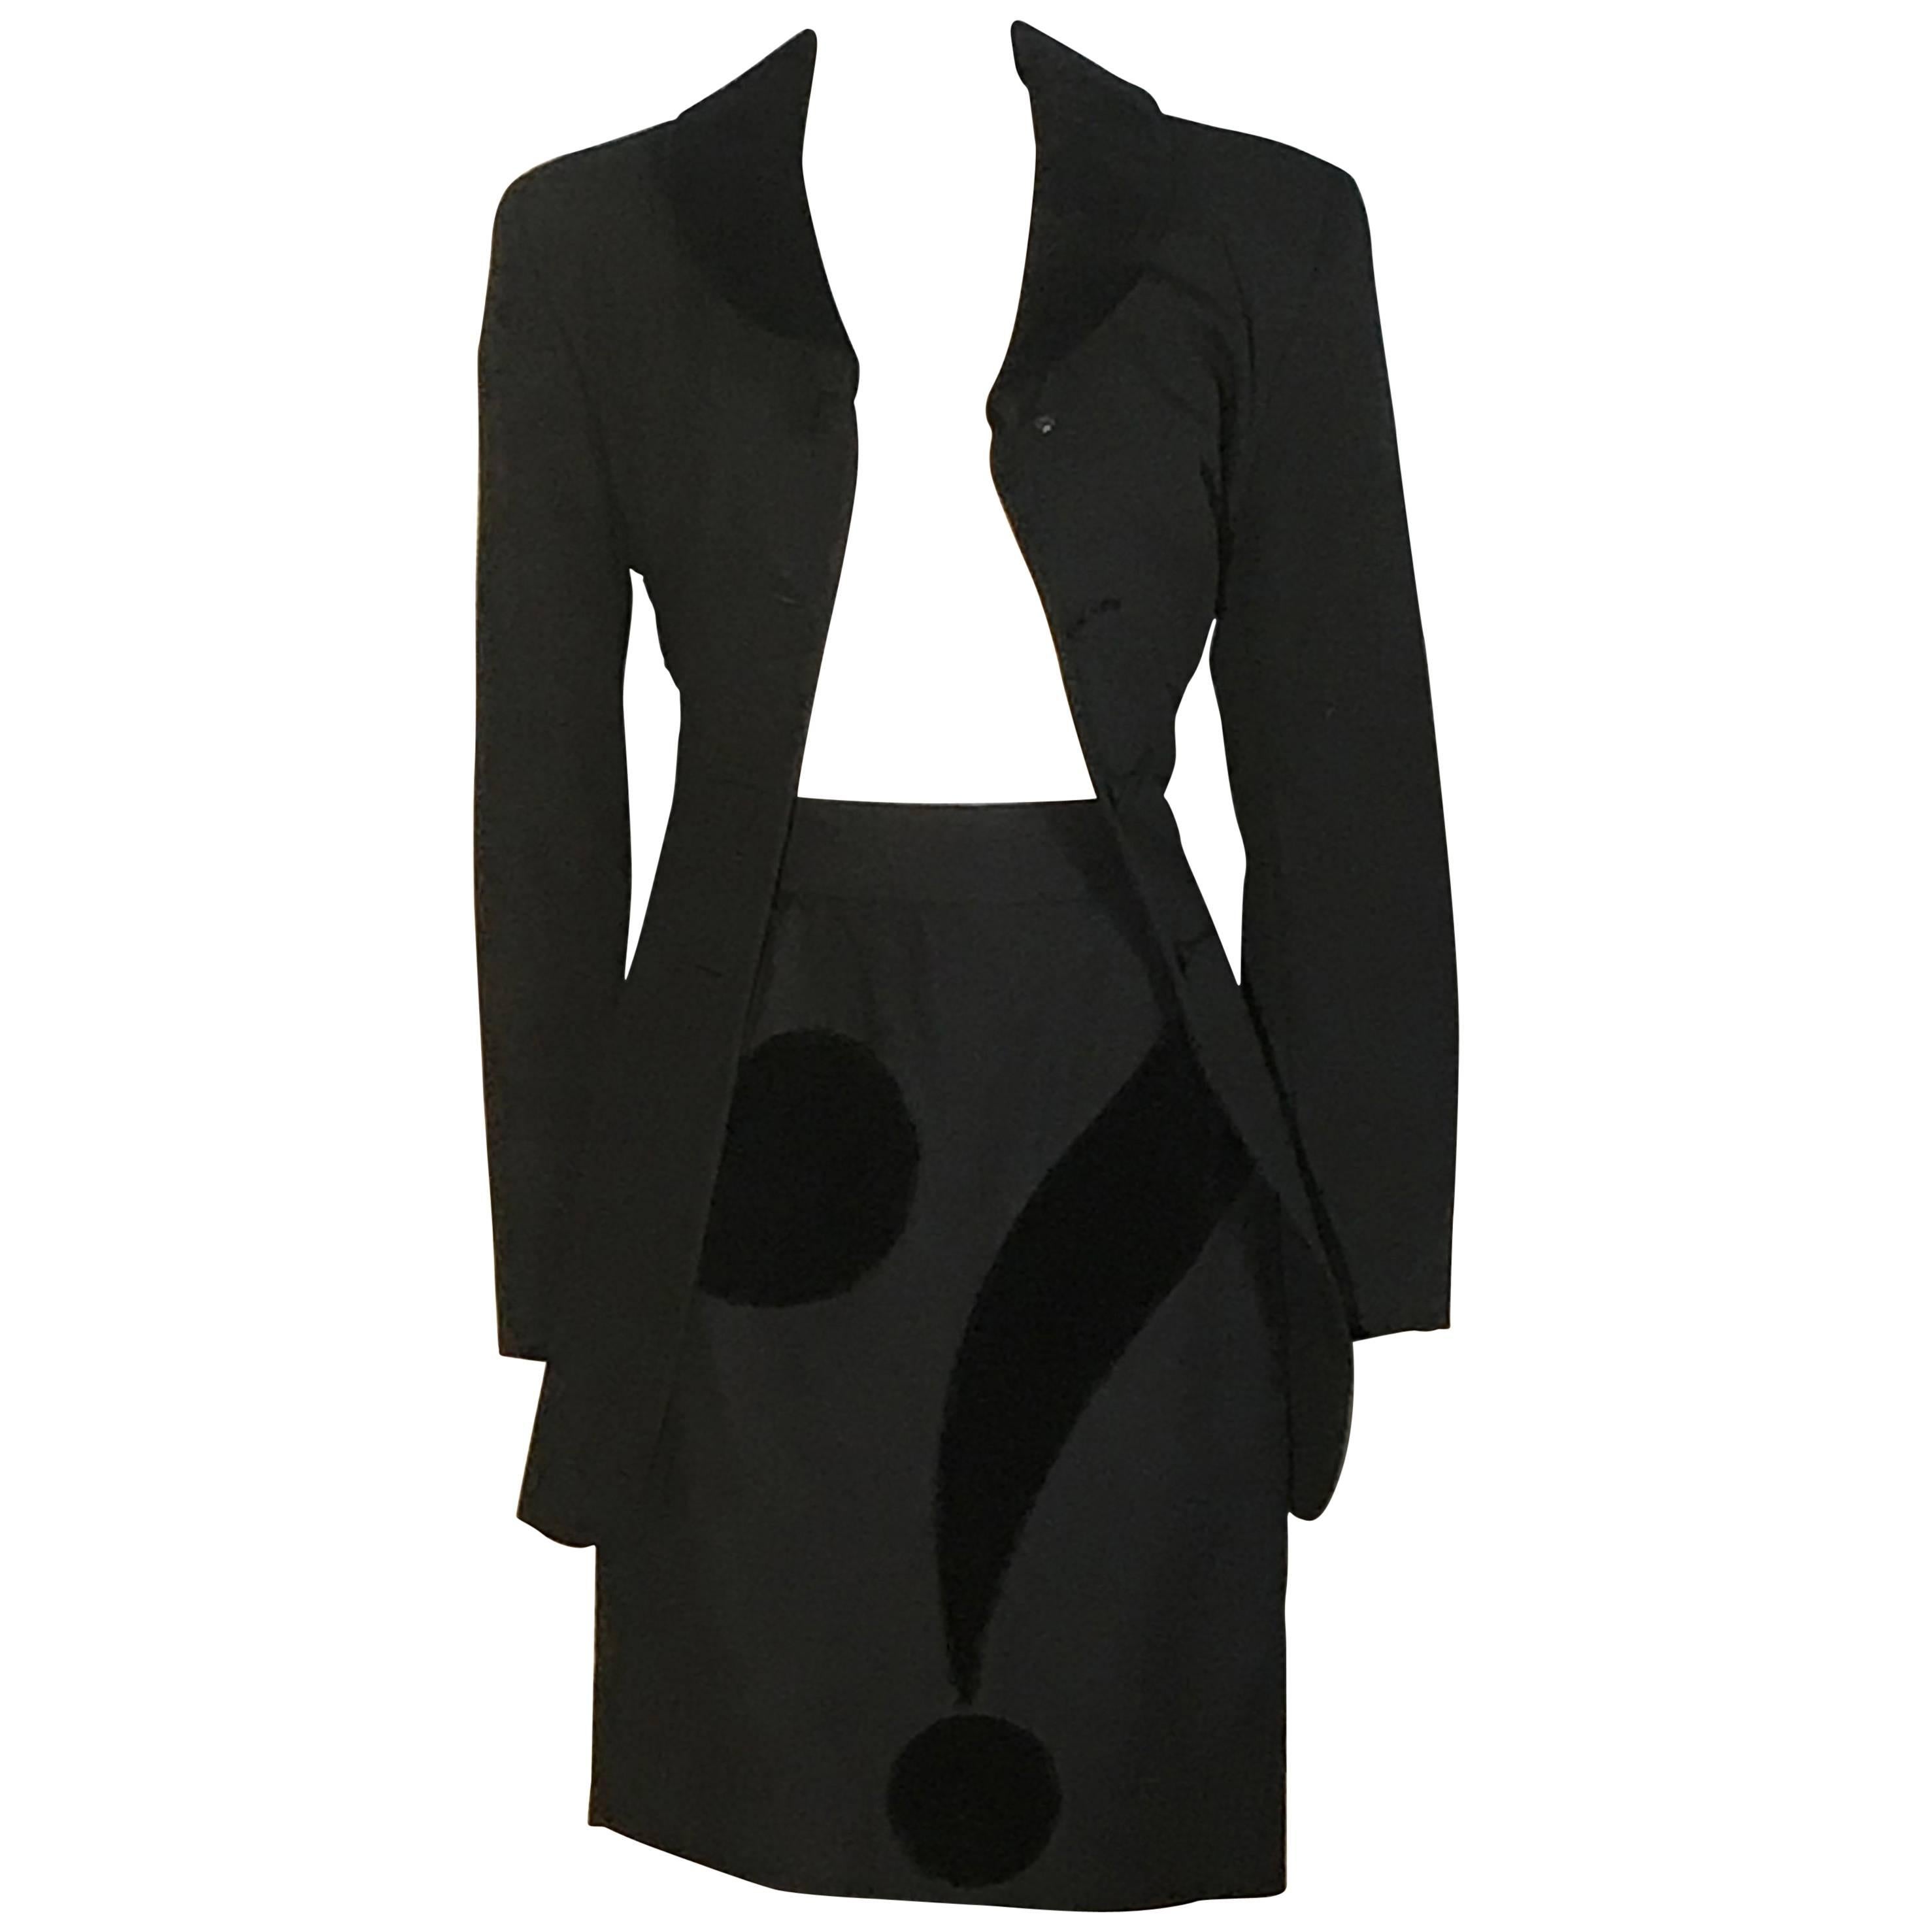 Moschino Cheap & Chic 1990s Black Question Mark Jacket and Skirt Suit